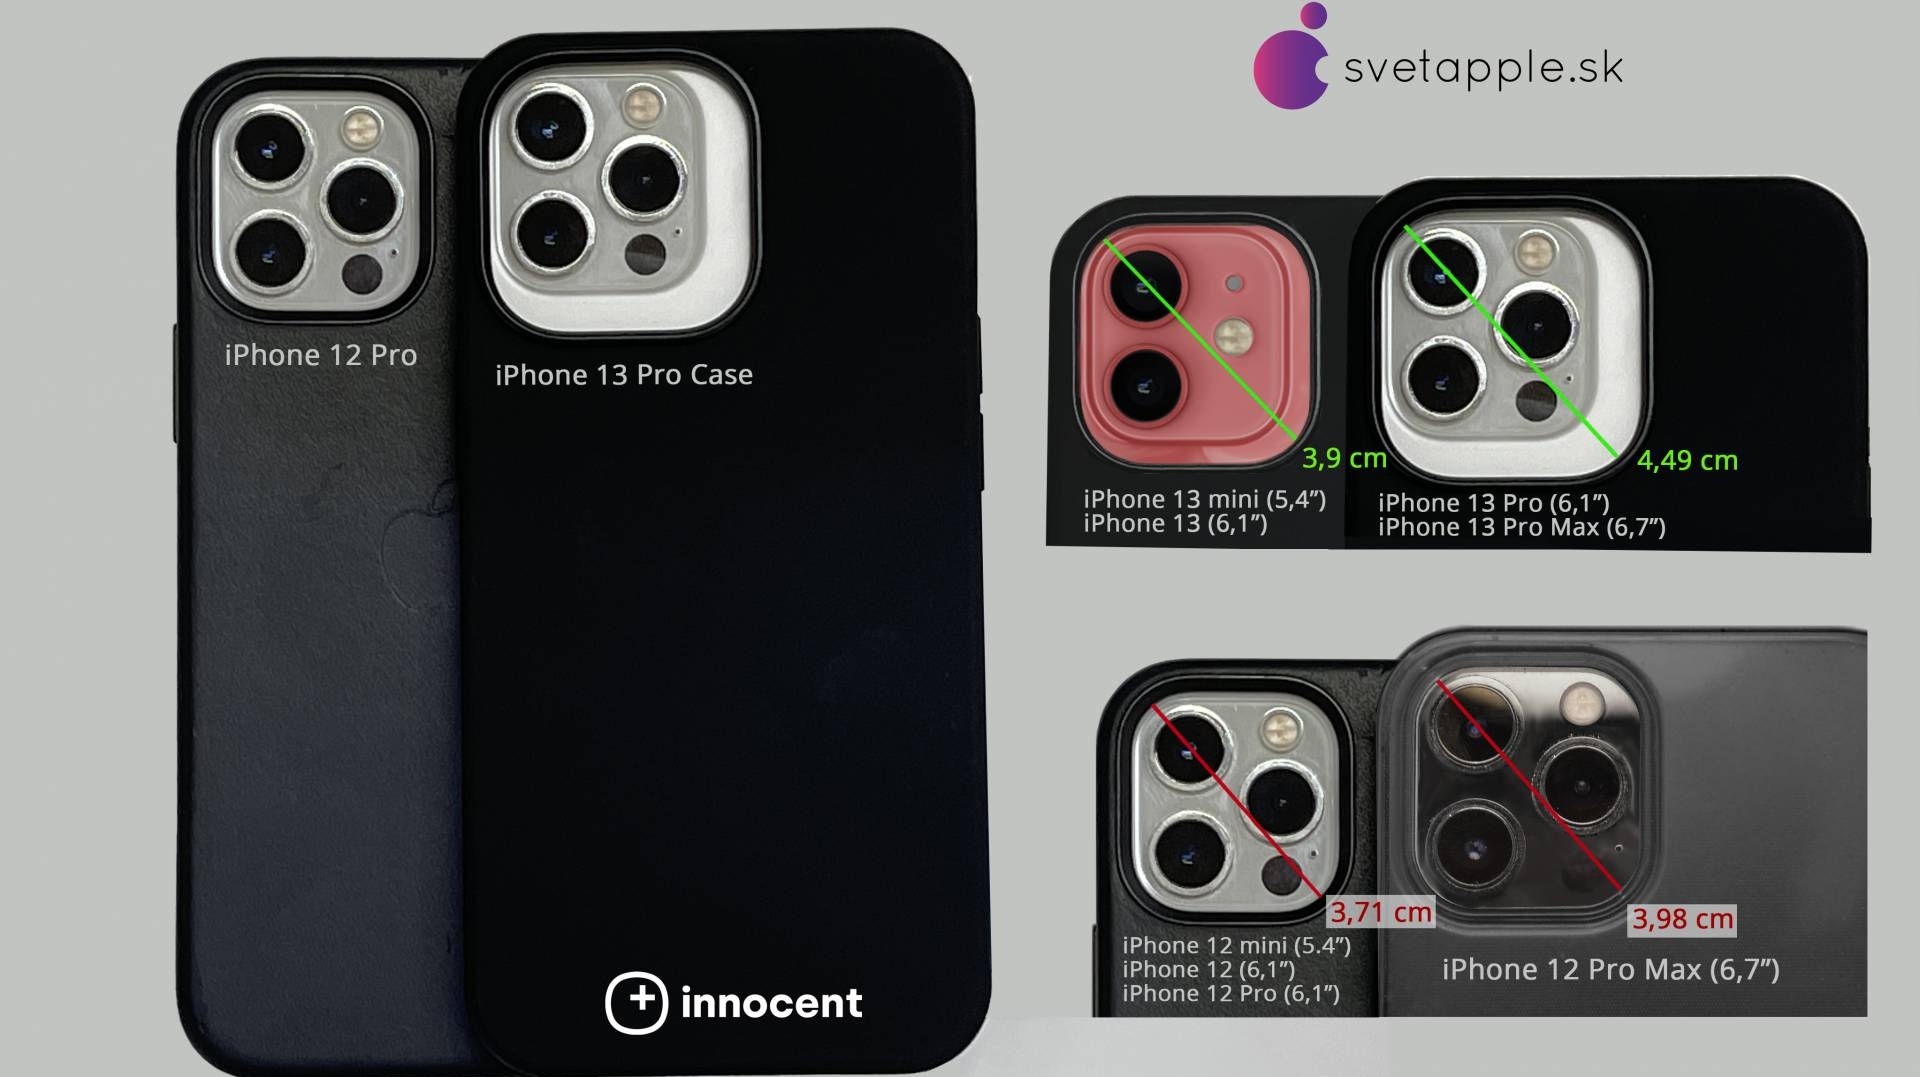 Images showing cases supposedly designed for the iPhone 13 range